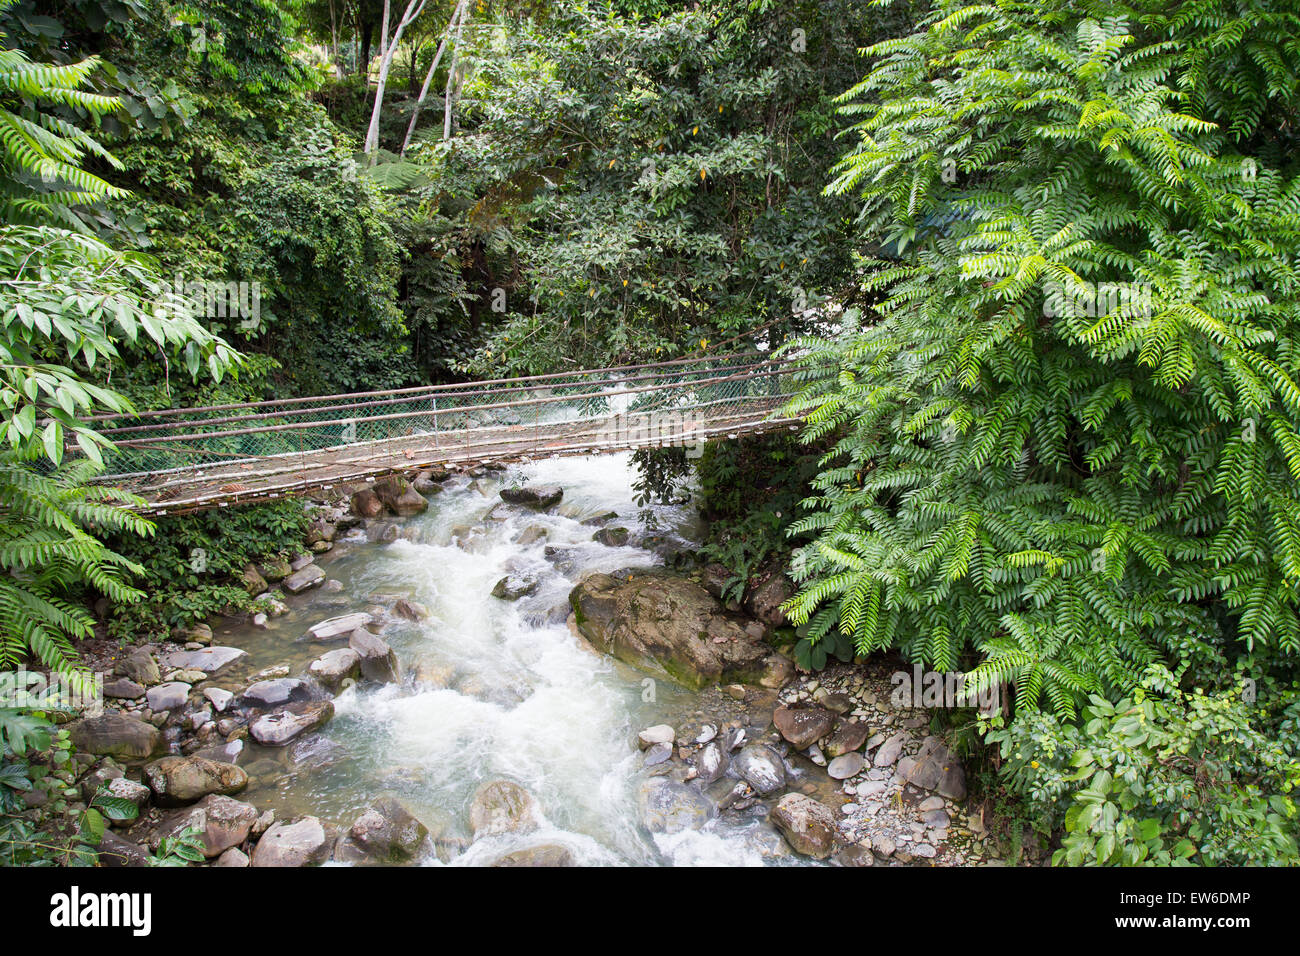 Waterfall At Poring Hot Spring, Sabah, Borneo Malaysia showing water flow capture in slow shutter Stock Photo